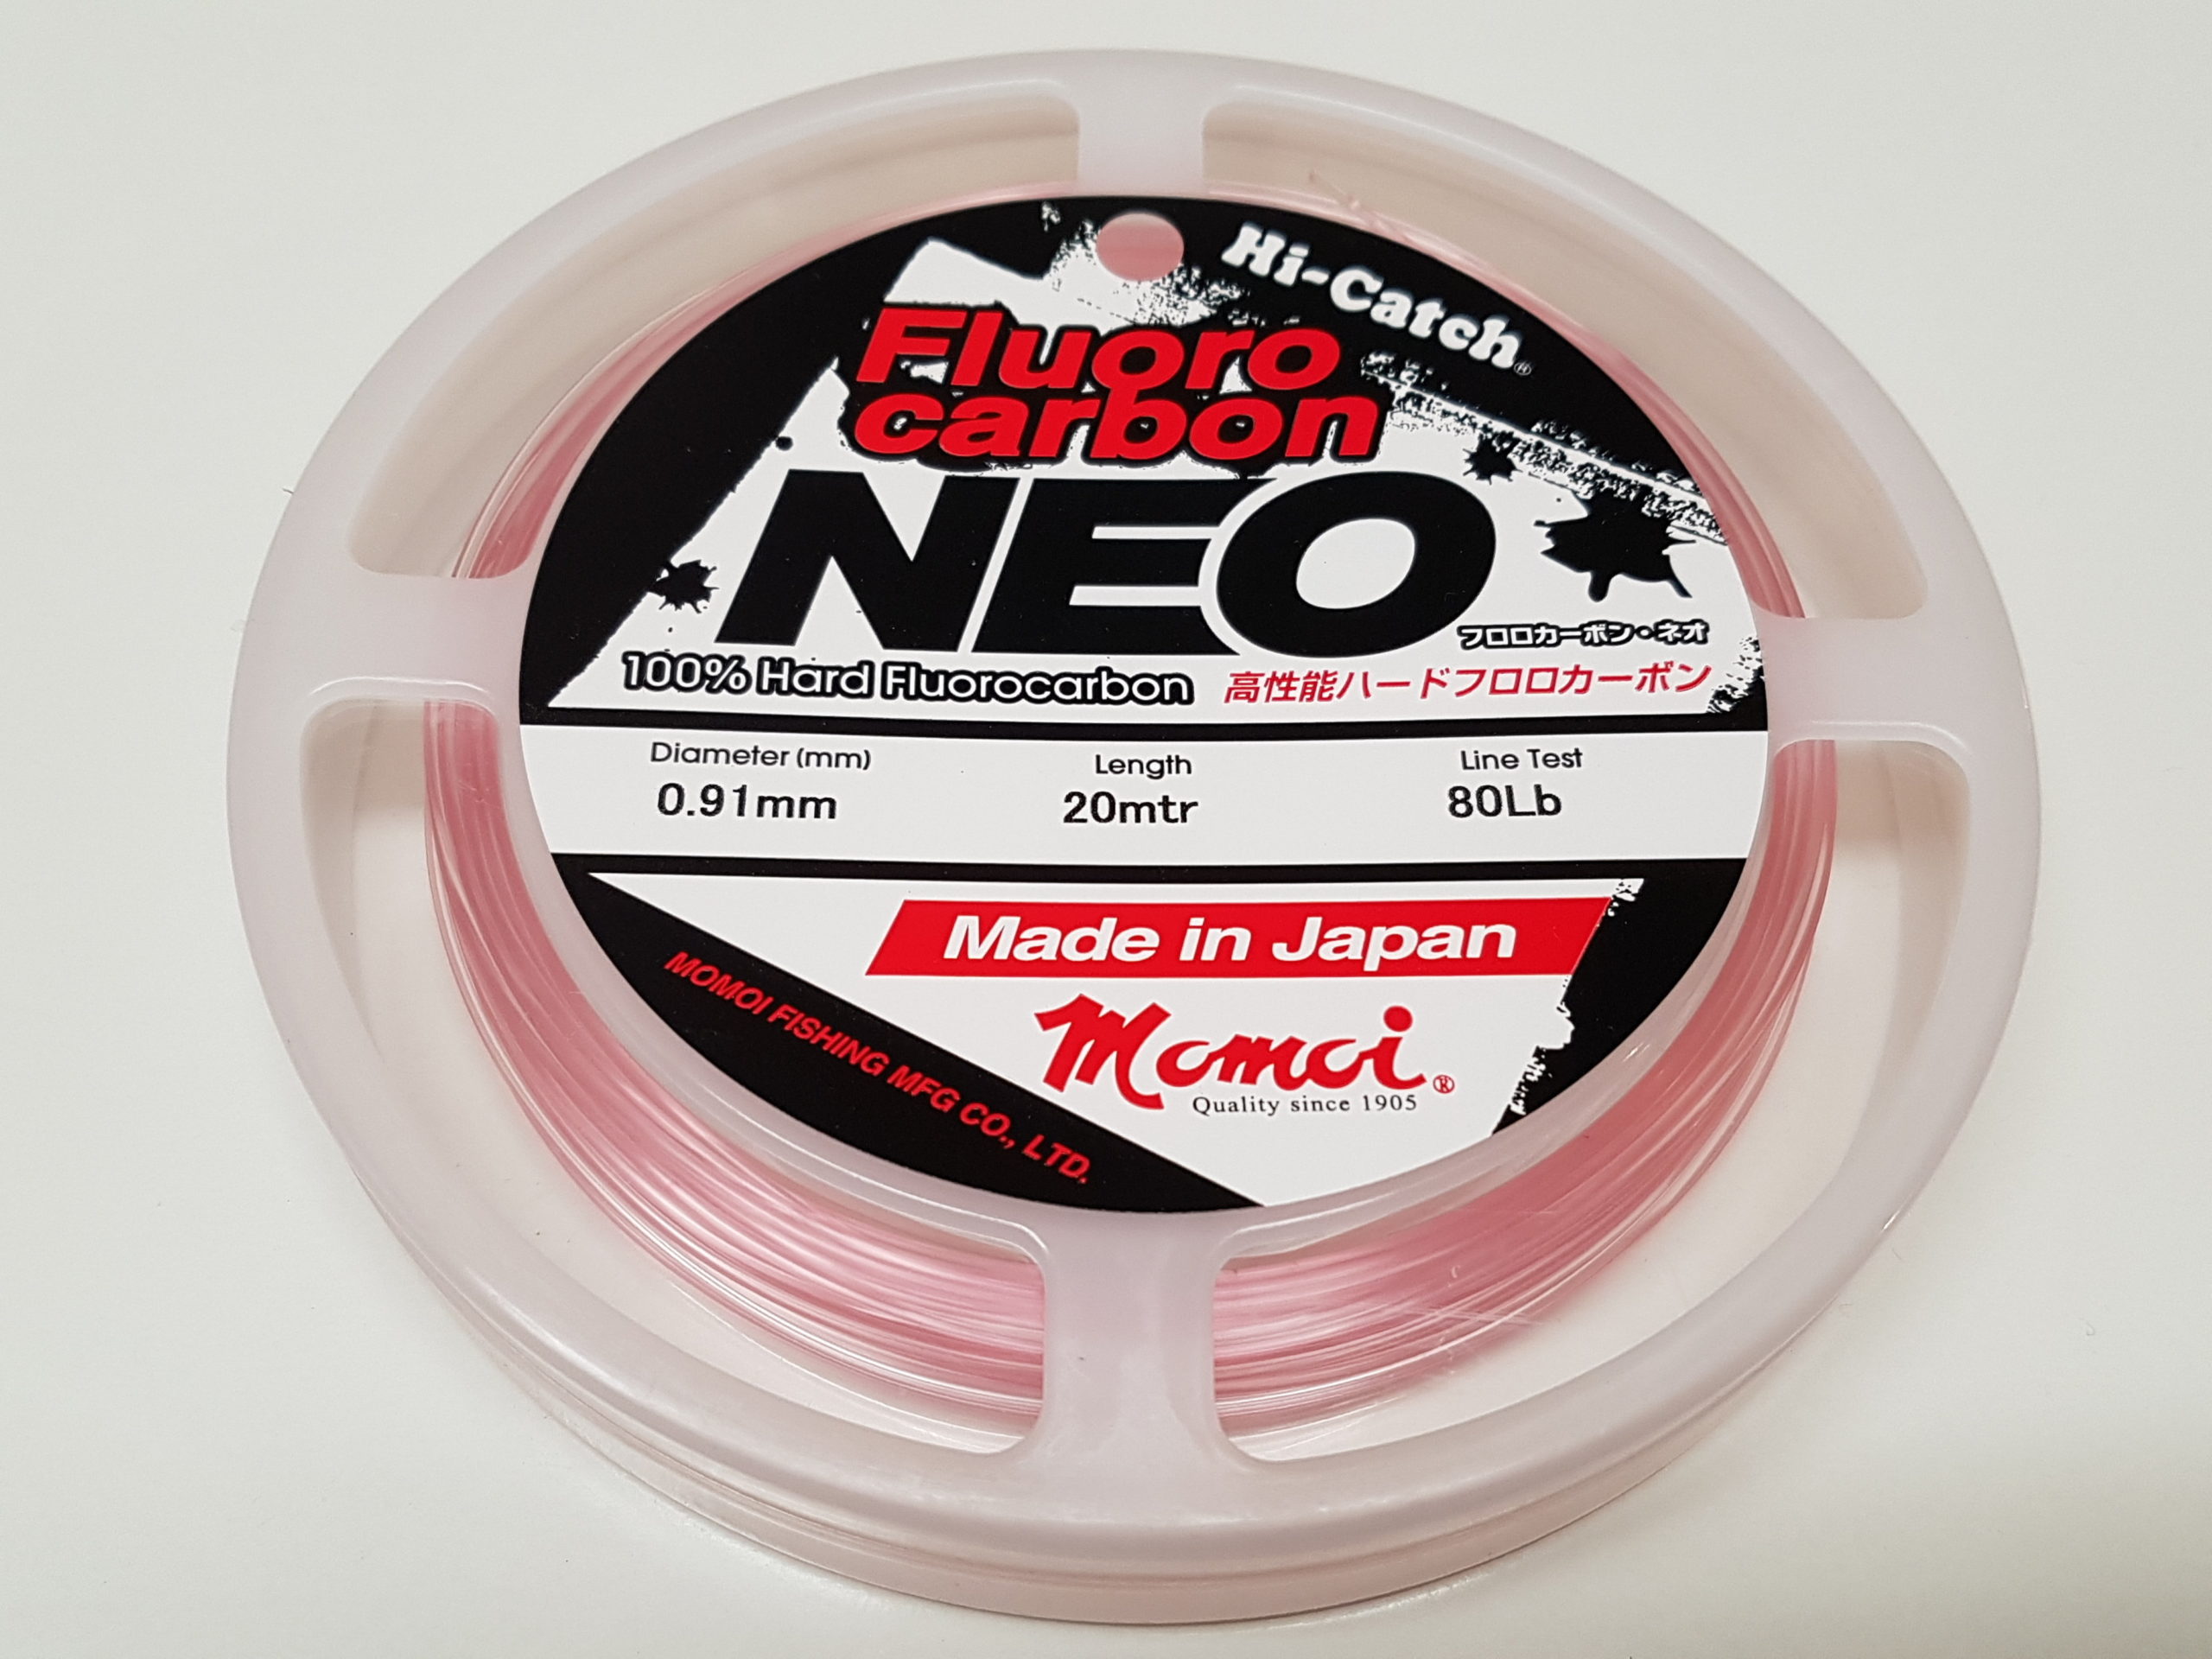 Pioneer Invisible Fluorocarbon Pink Fishing Leader Line - 40Lb, Shop  Today. Get it Tomorrow!